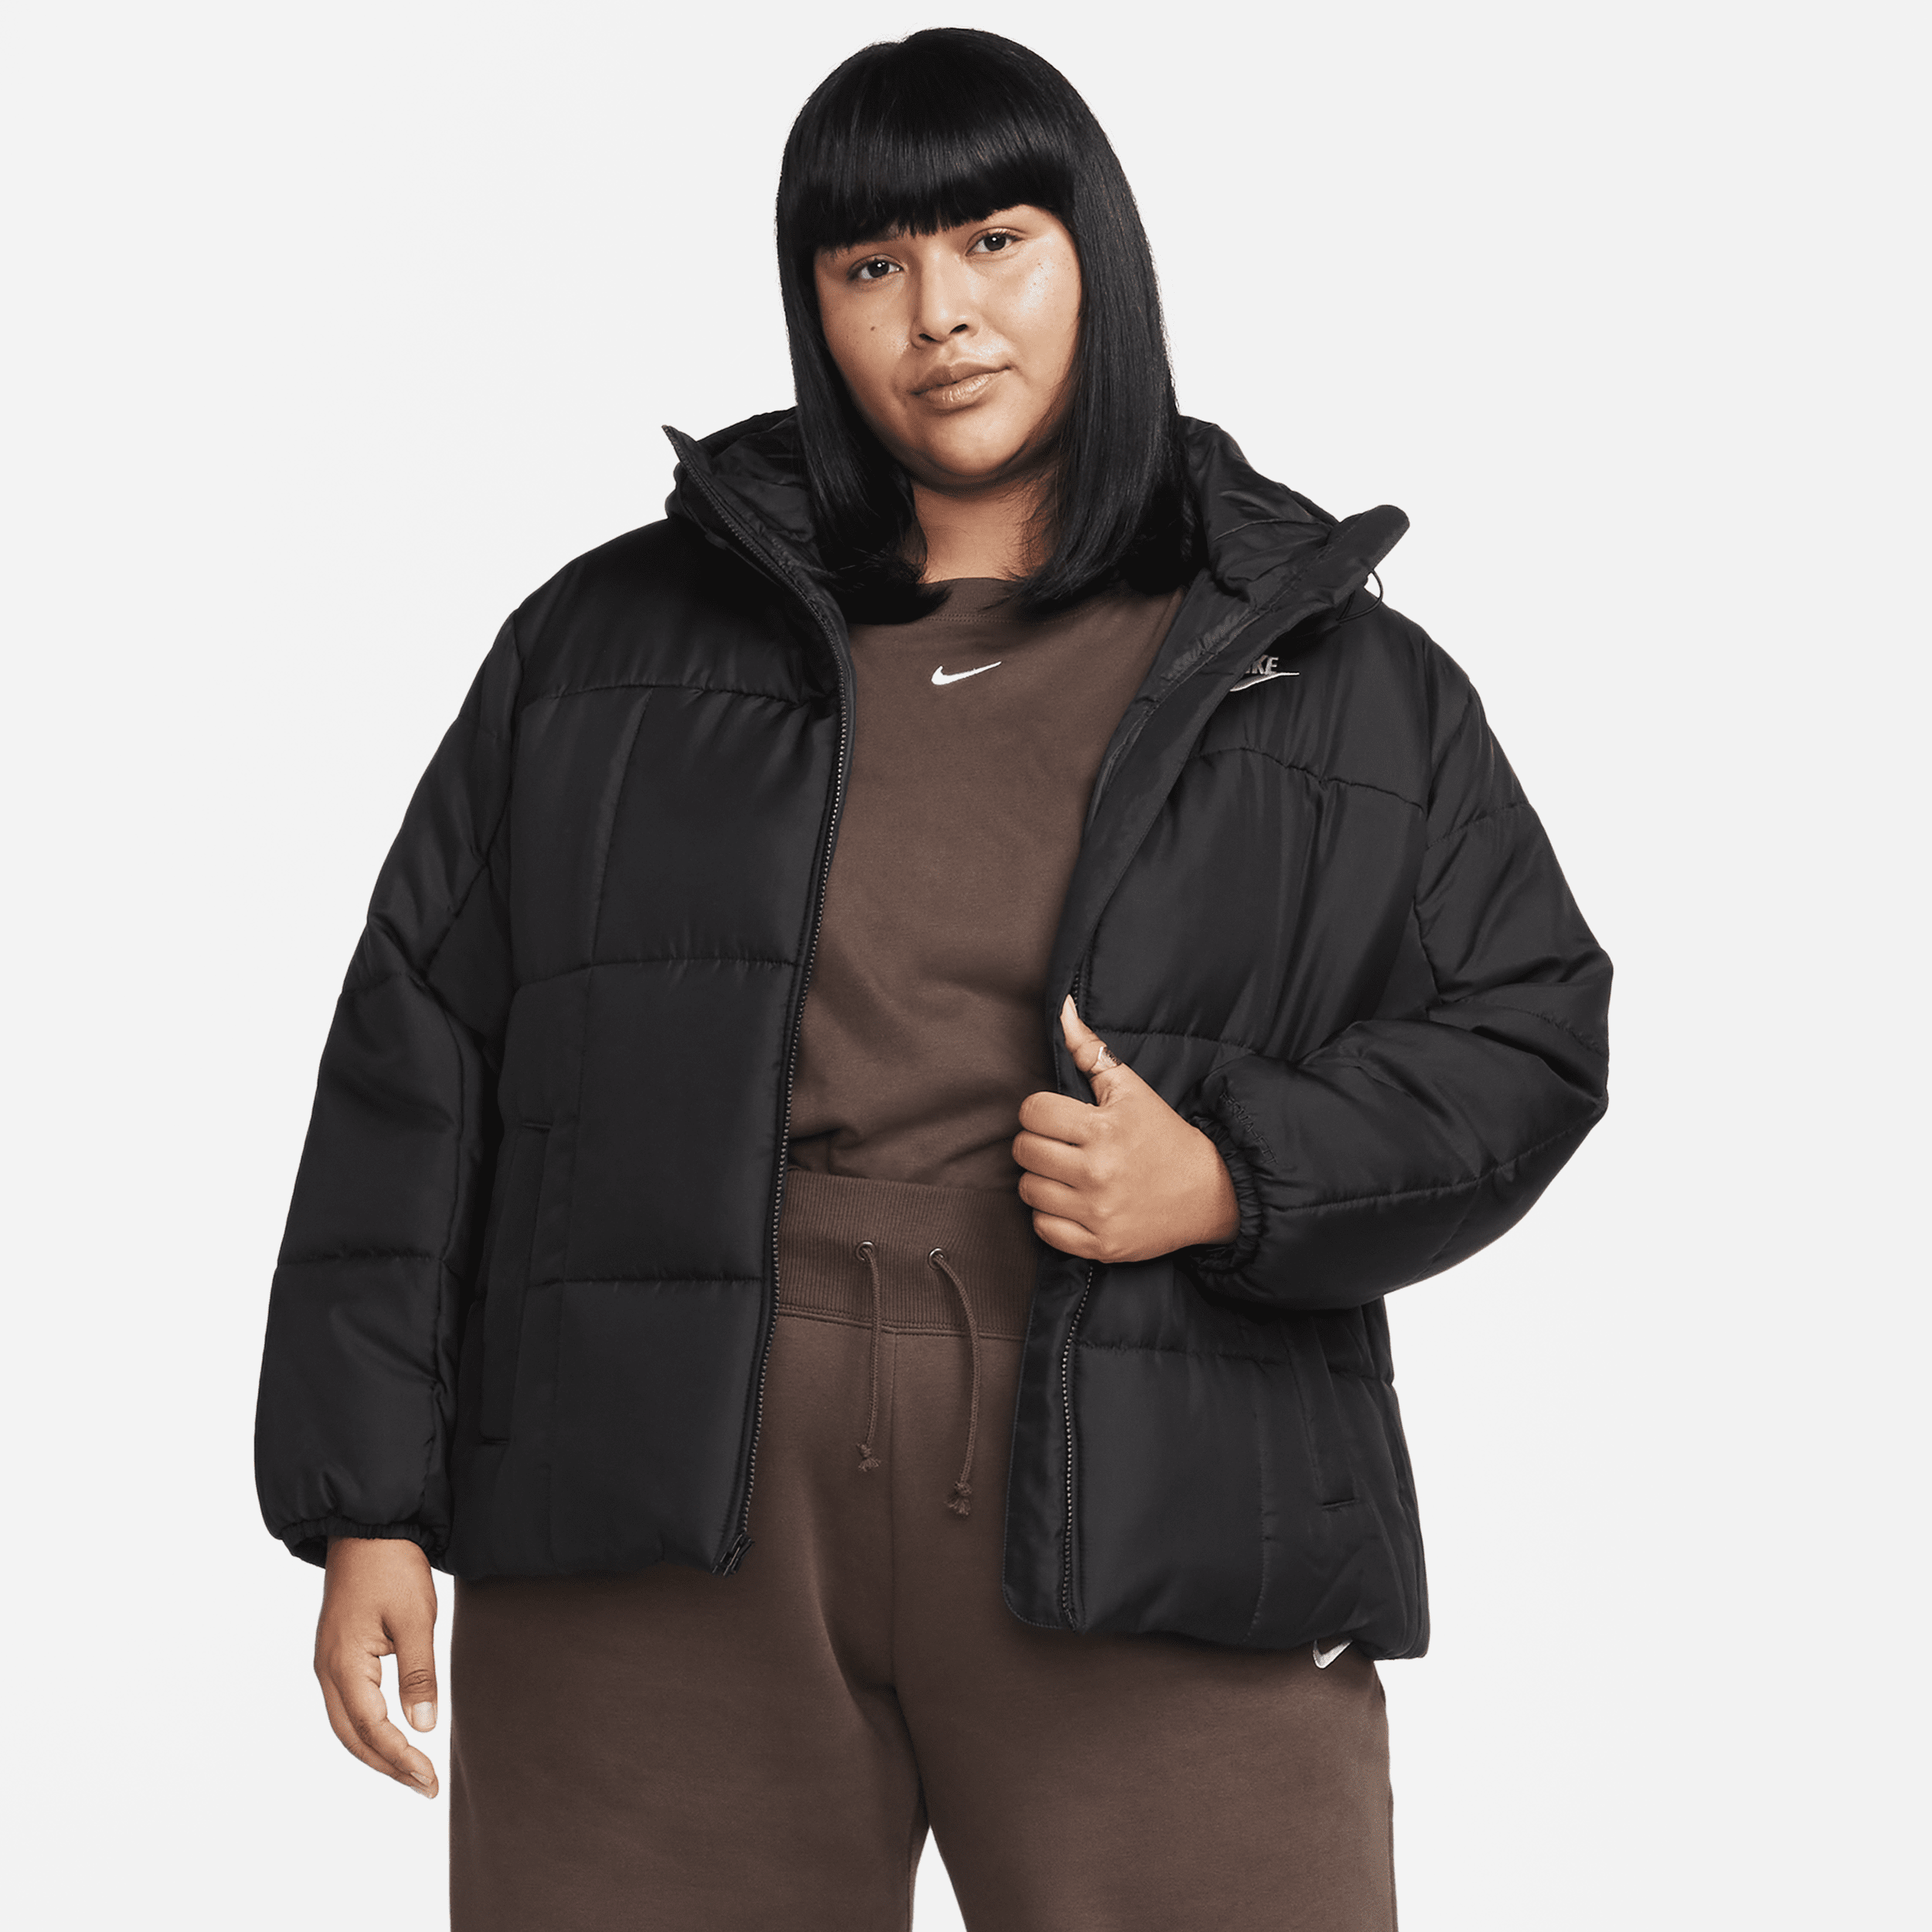 Giacca puffer Therma-FIT Nike Sportswear Essential – Donna - Nero